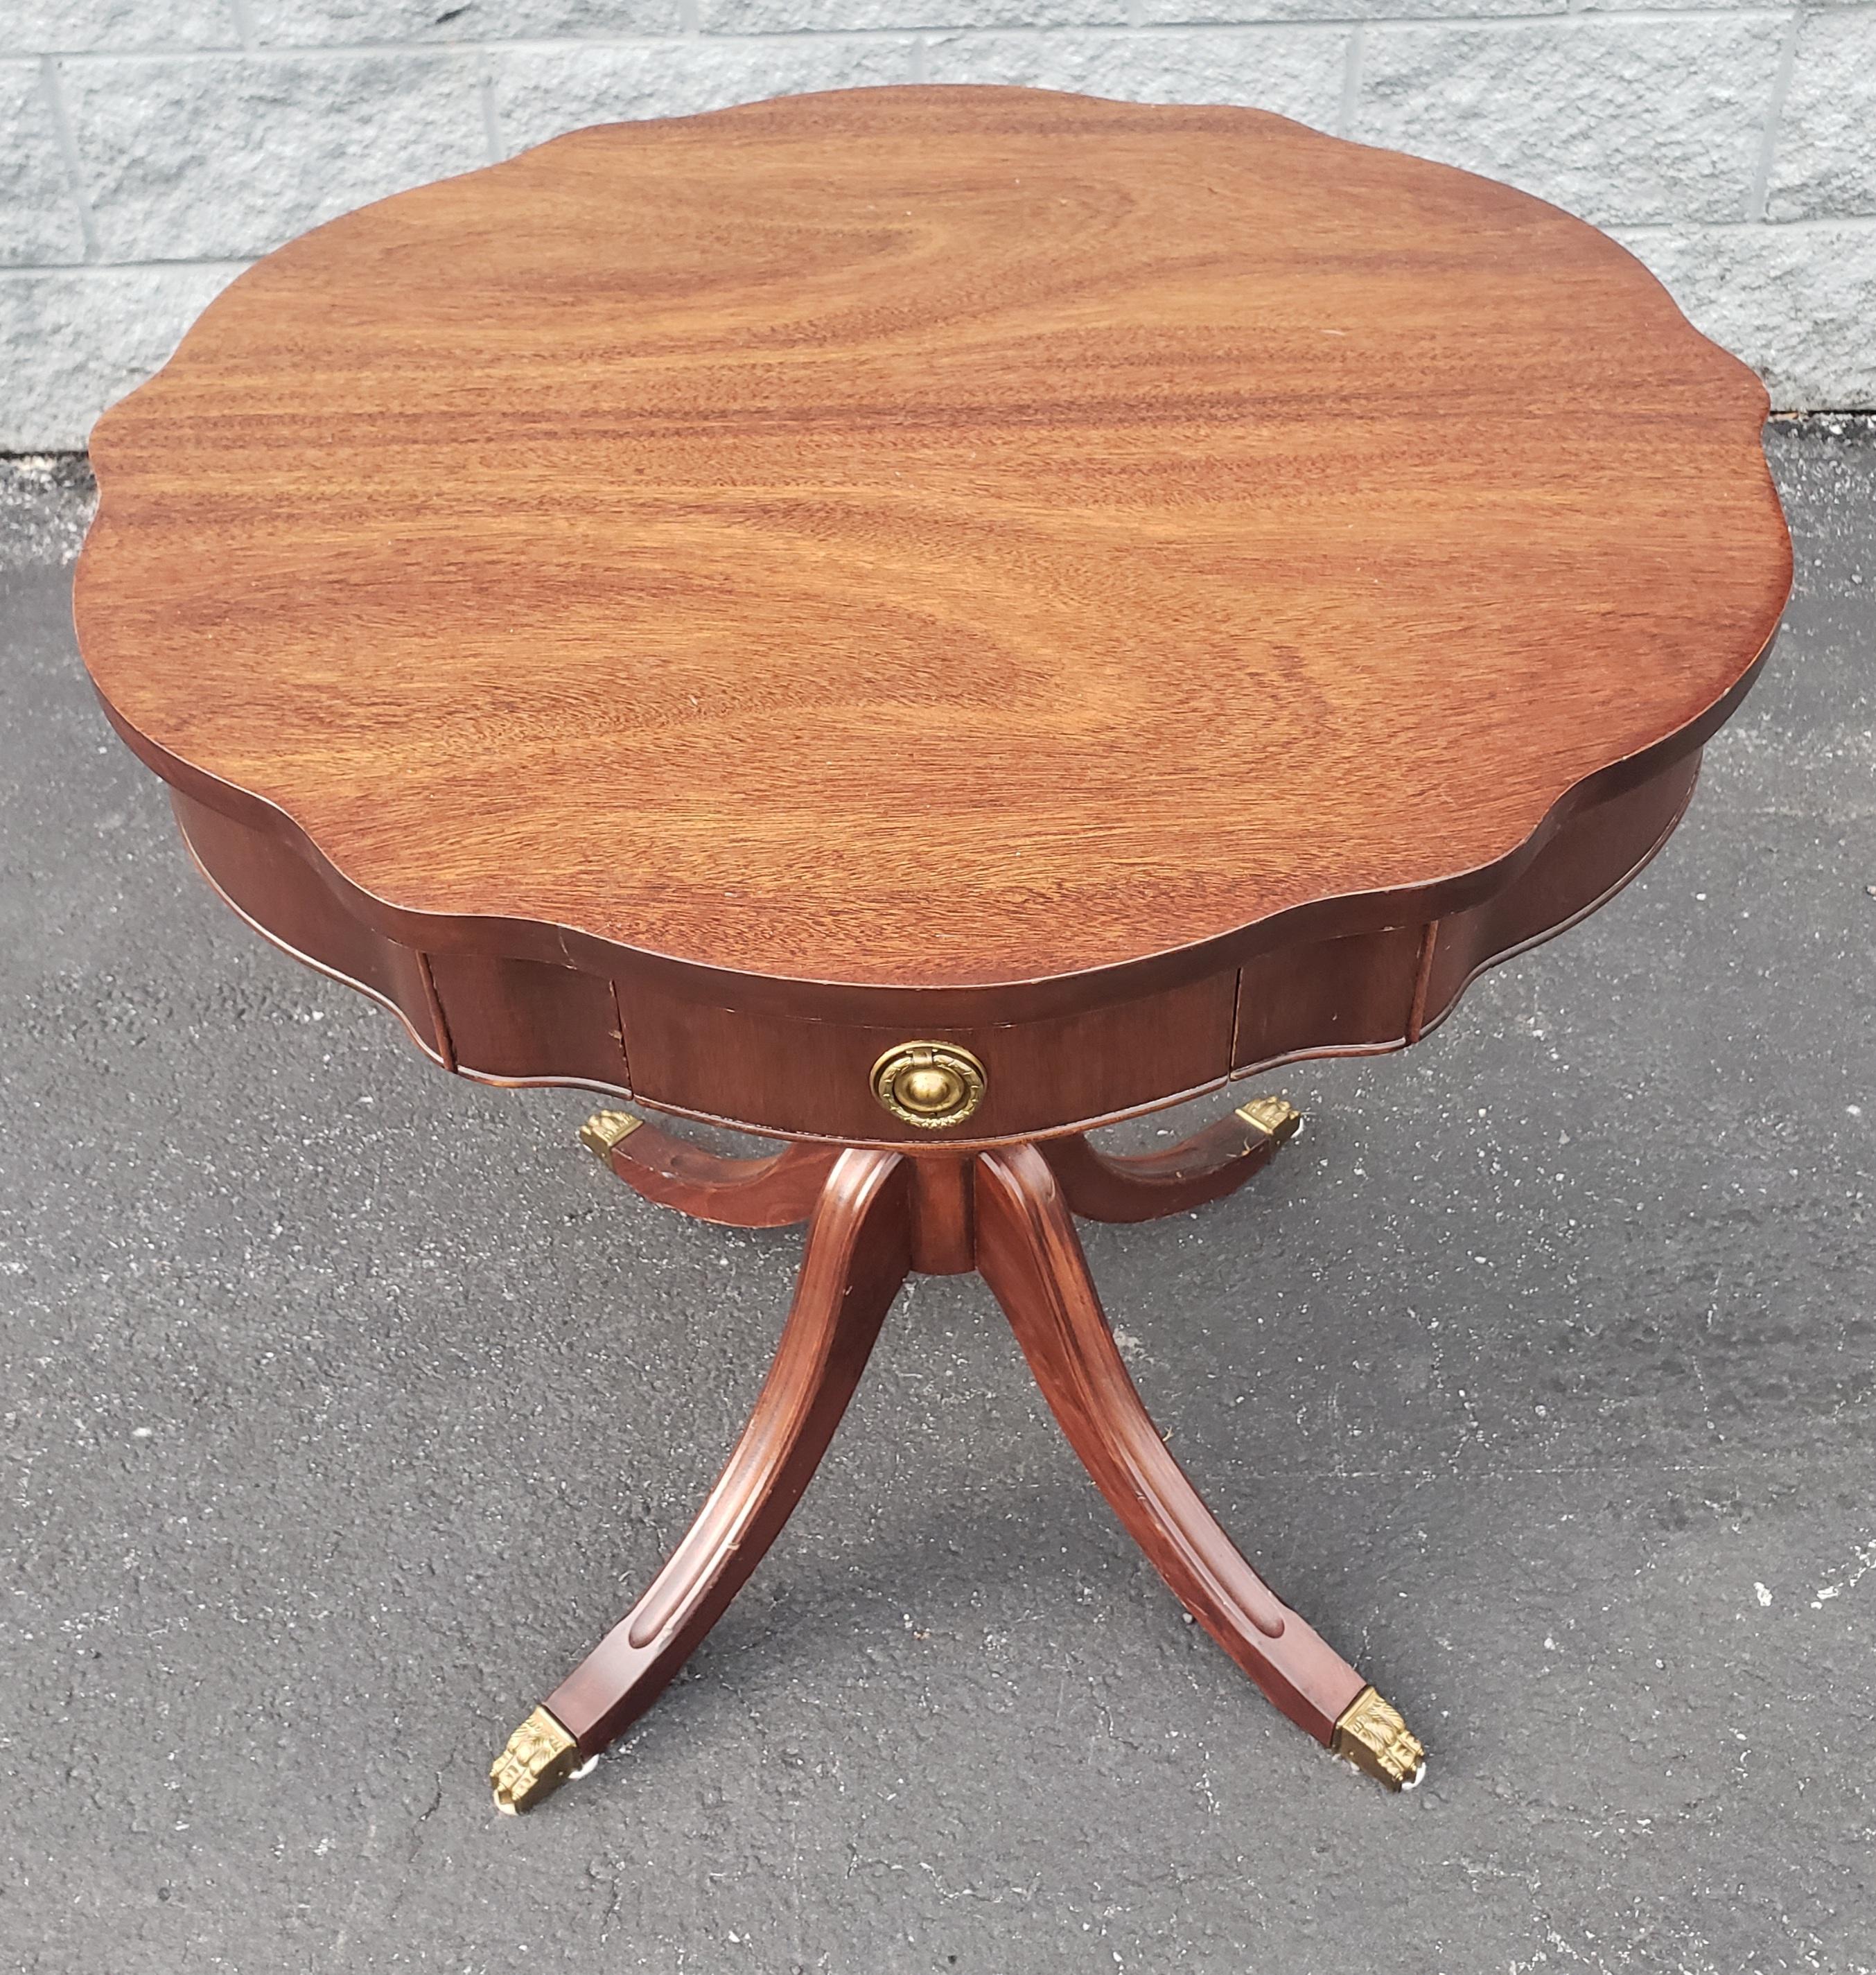 A beautifully refinished Mahogany Single Drawer quadpod pedestal drum table. Great condition.
Measures 28